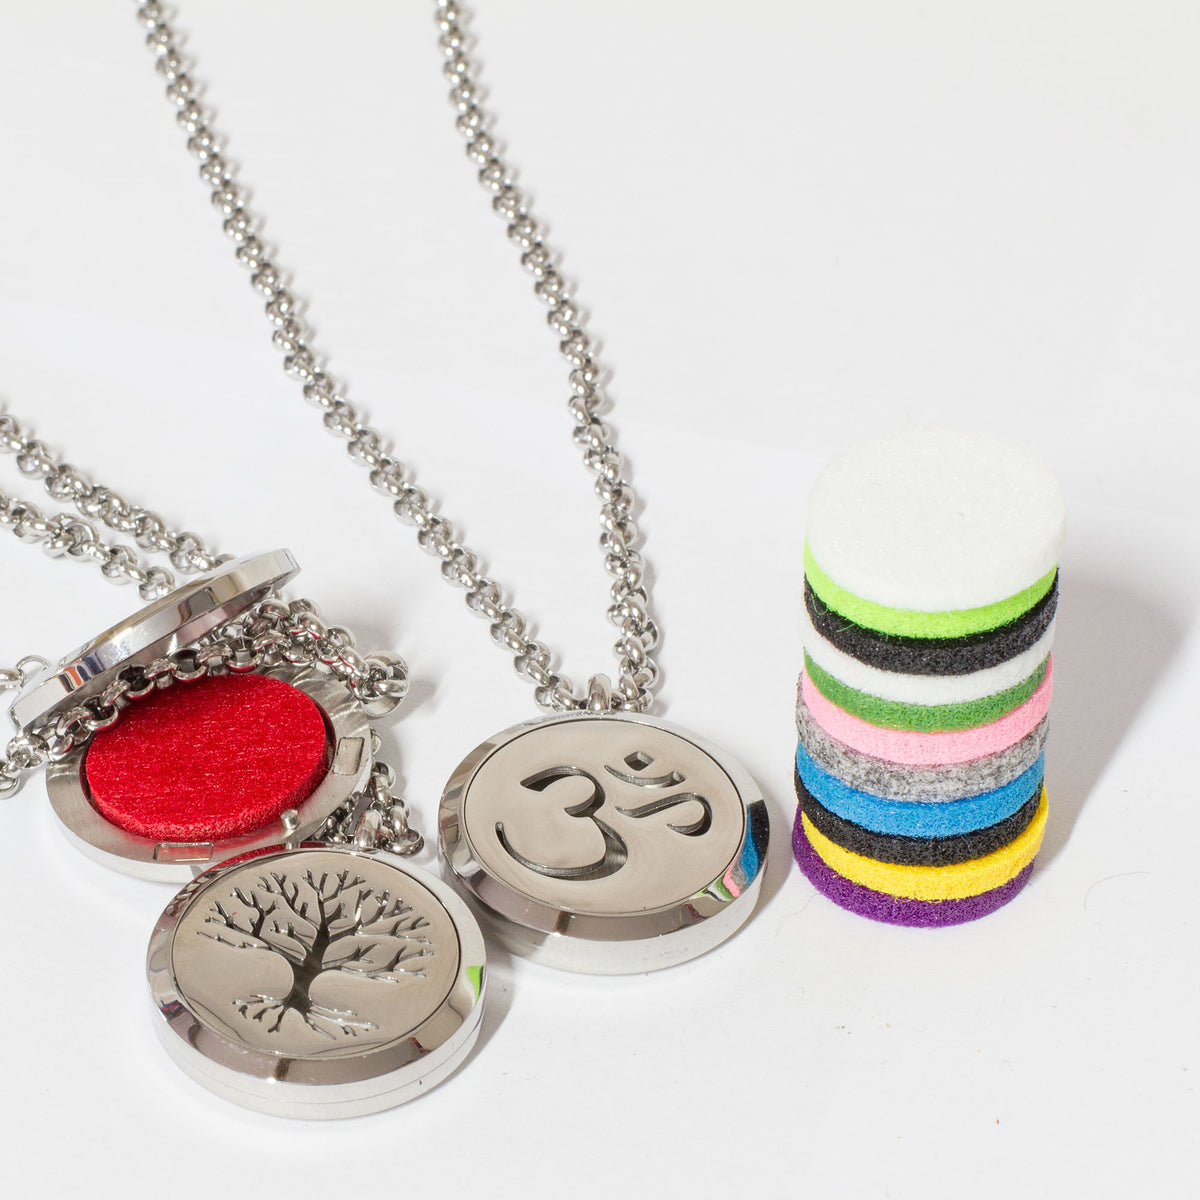 These stunning Sterling silver Diffuser necklace&#39;s come with 12 assorted color pads which you dab a few drops of the 7 Chakra oil onto them, leaving you in tranquility all day long, not to mention leaving you smelling great all day. They are packaged in a beautiful wooden box and perfect as a gift. 